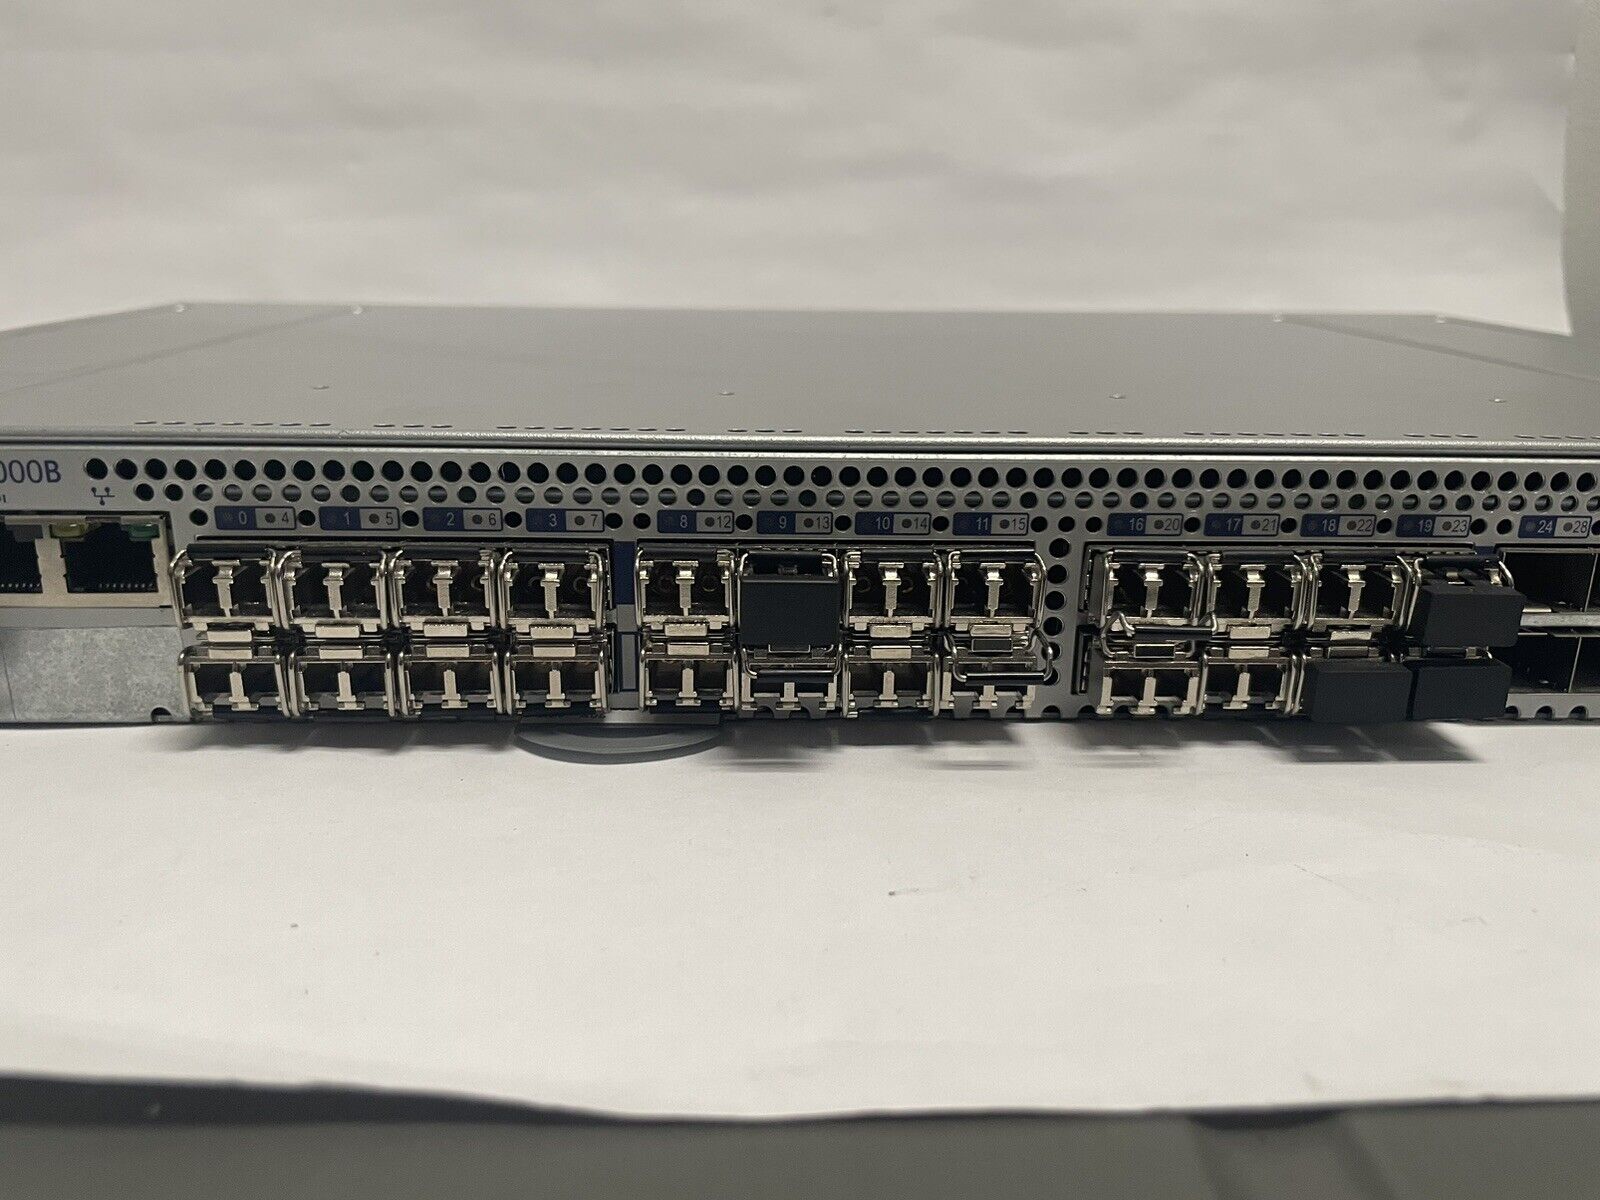 EMC Brocade 5000 DS-5000B 32 Port FC Switch w/ 24 Active Ports   Tested working 